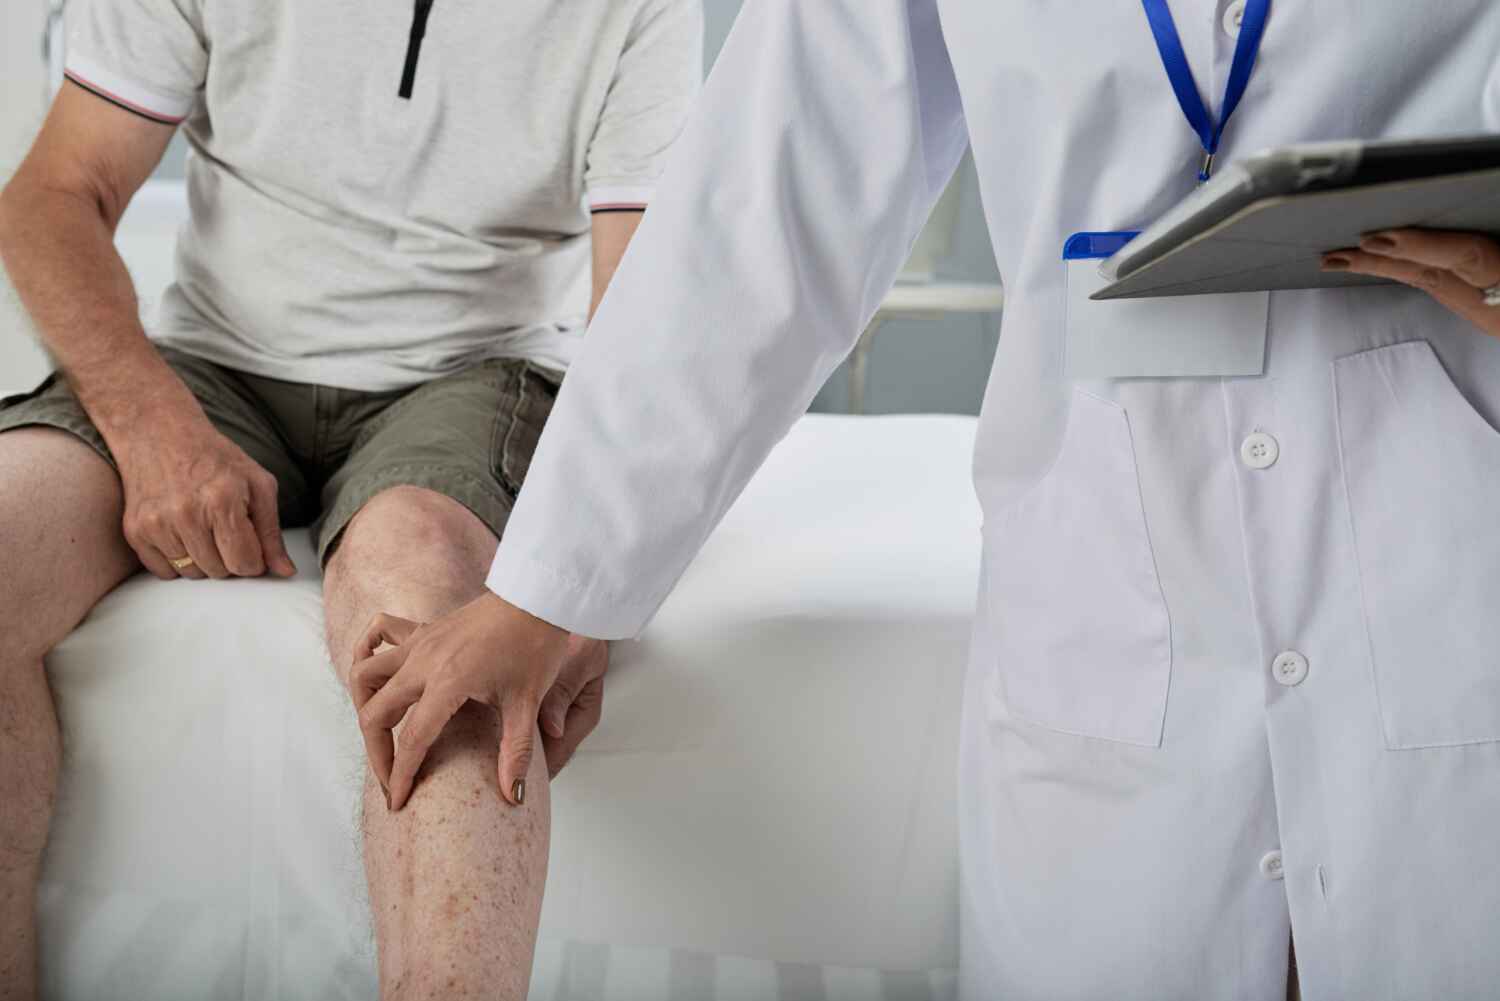 Non-Surgical Treatments for Joint Pain